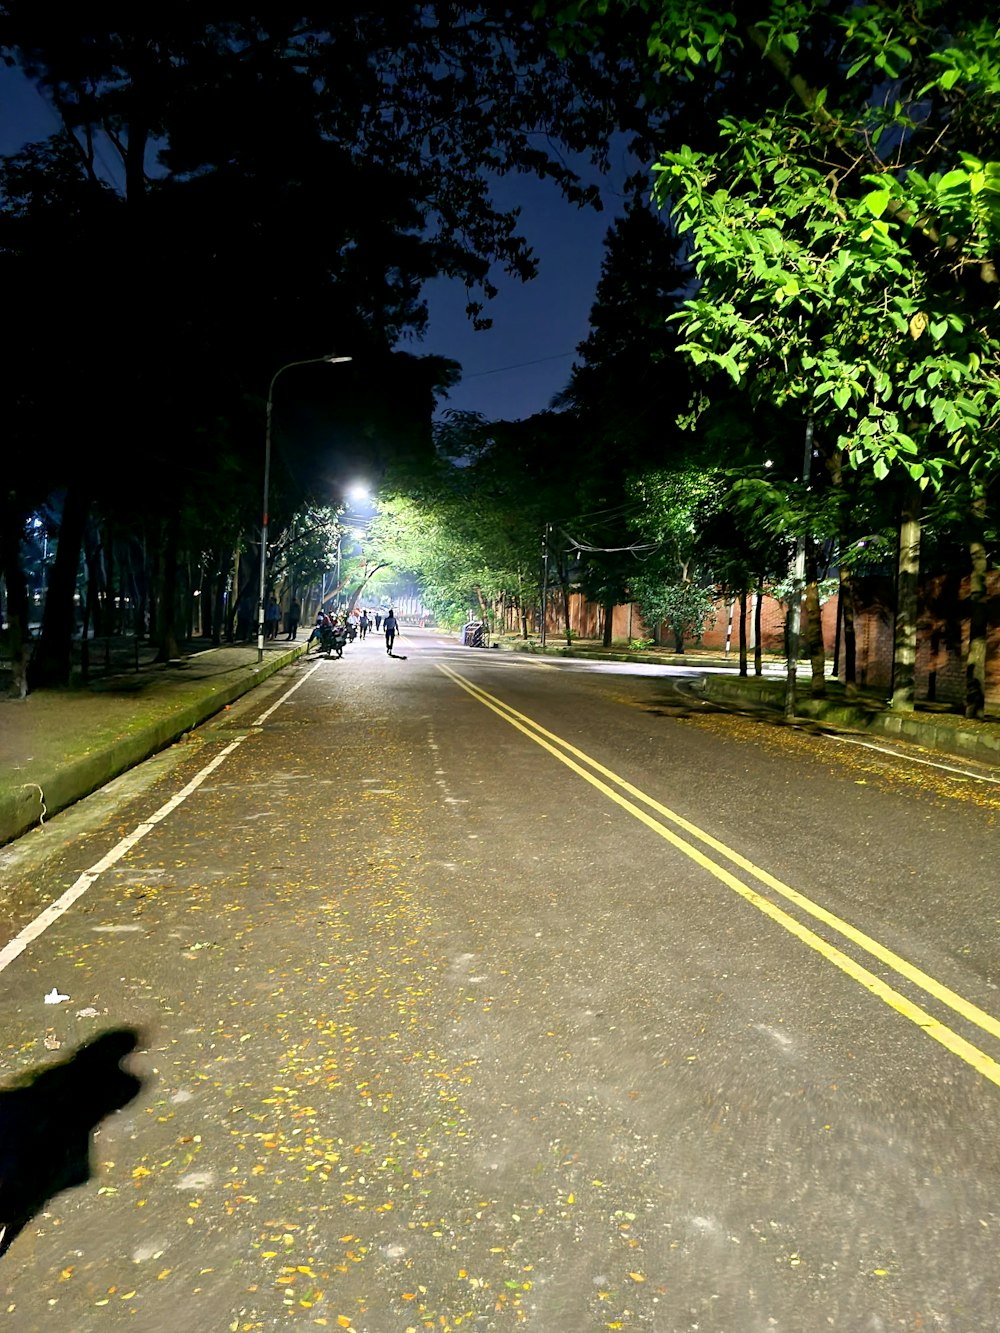 person riding bicycle on road during night time